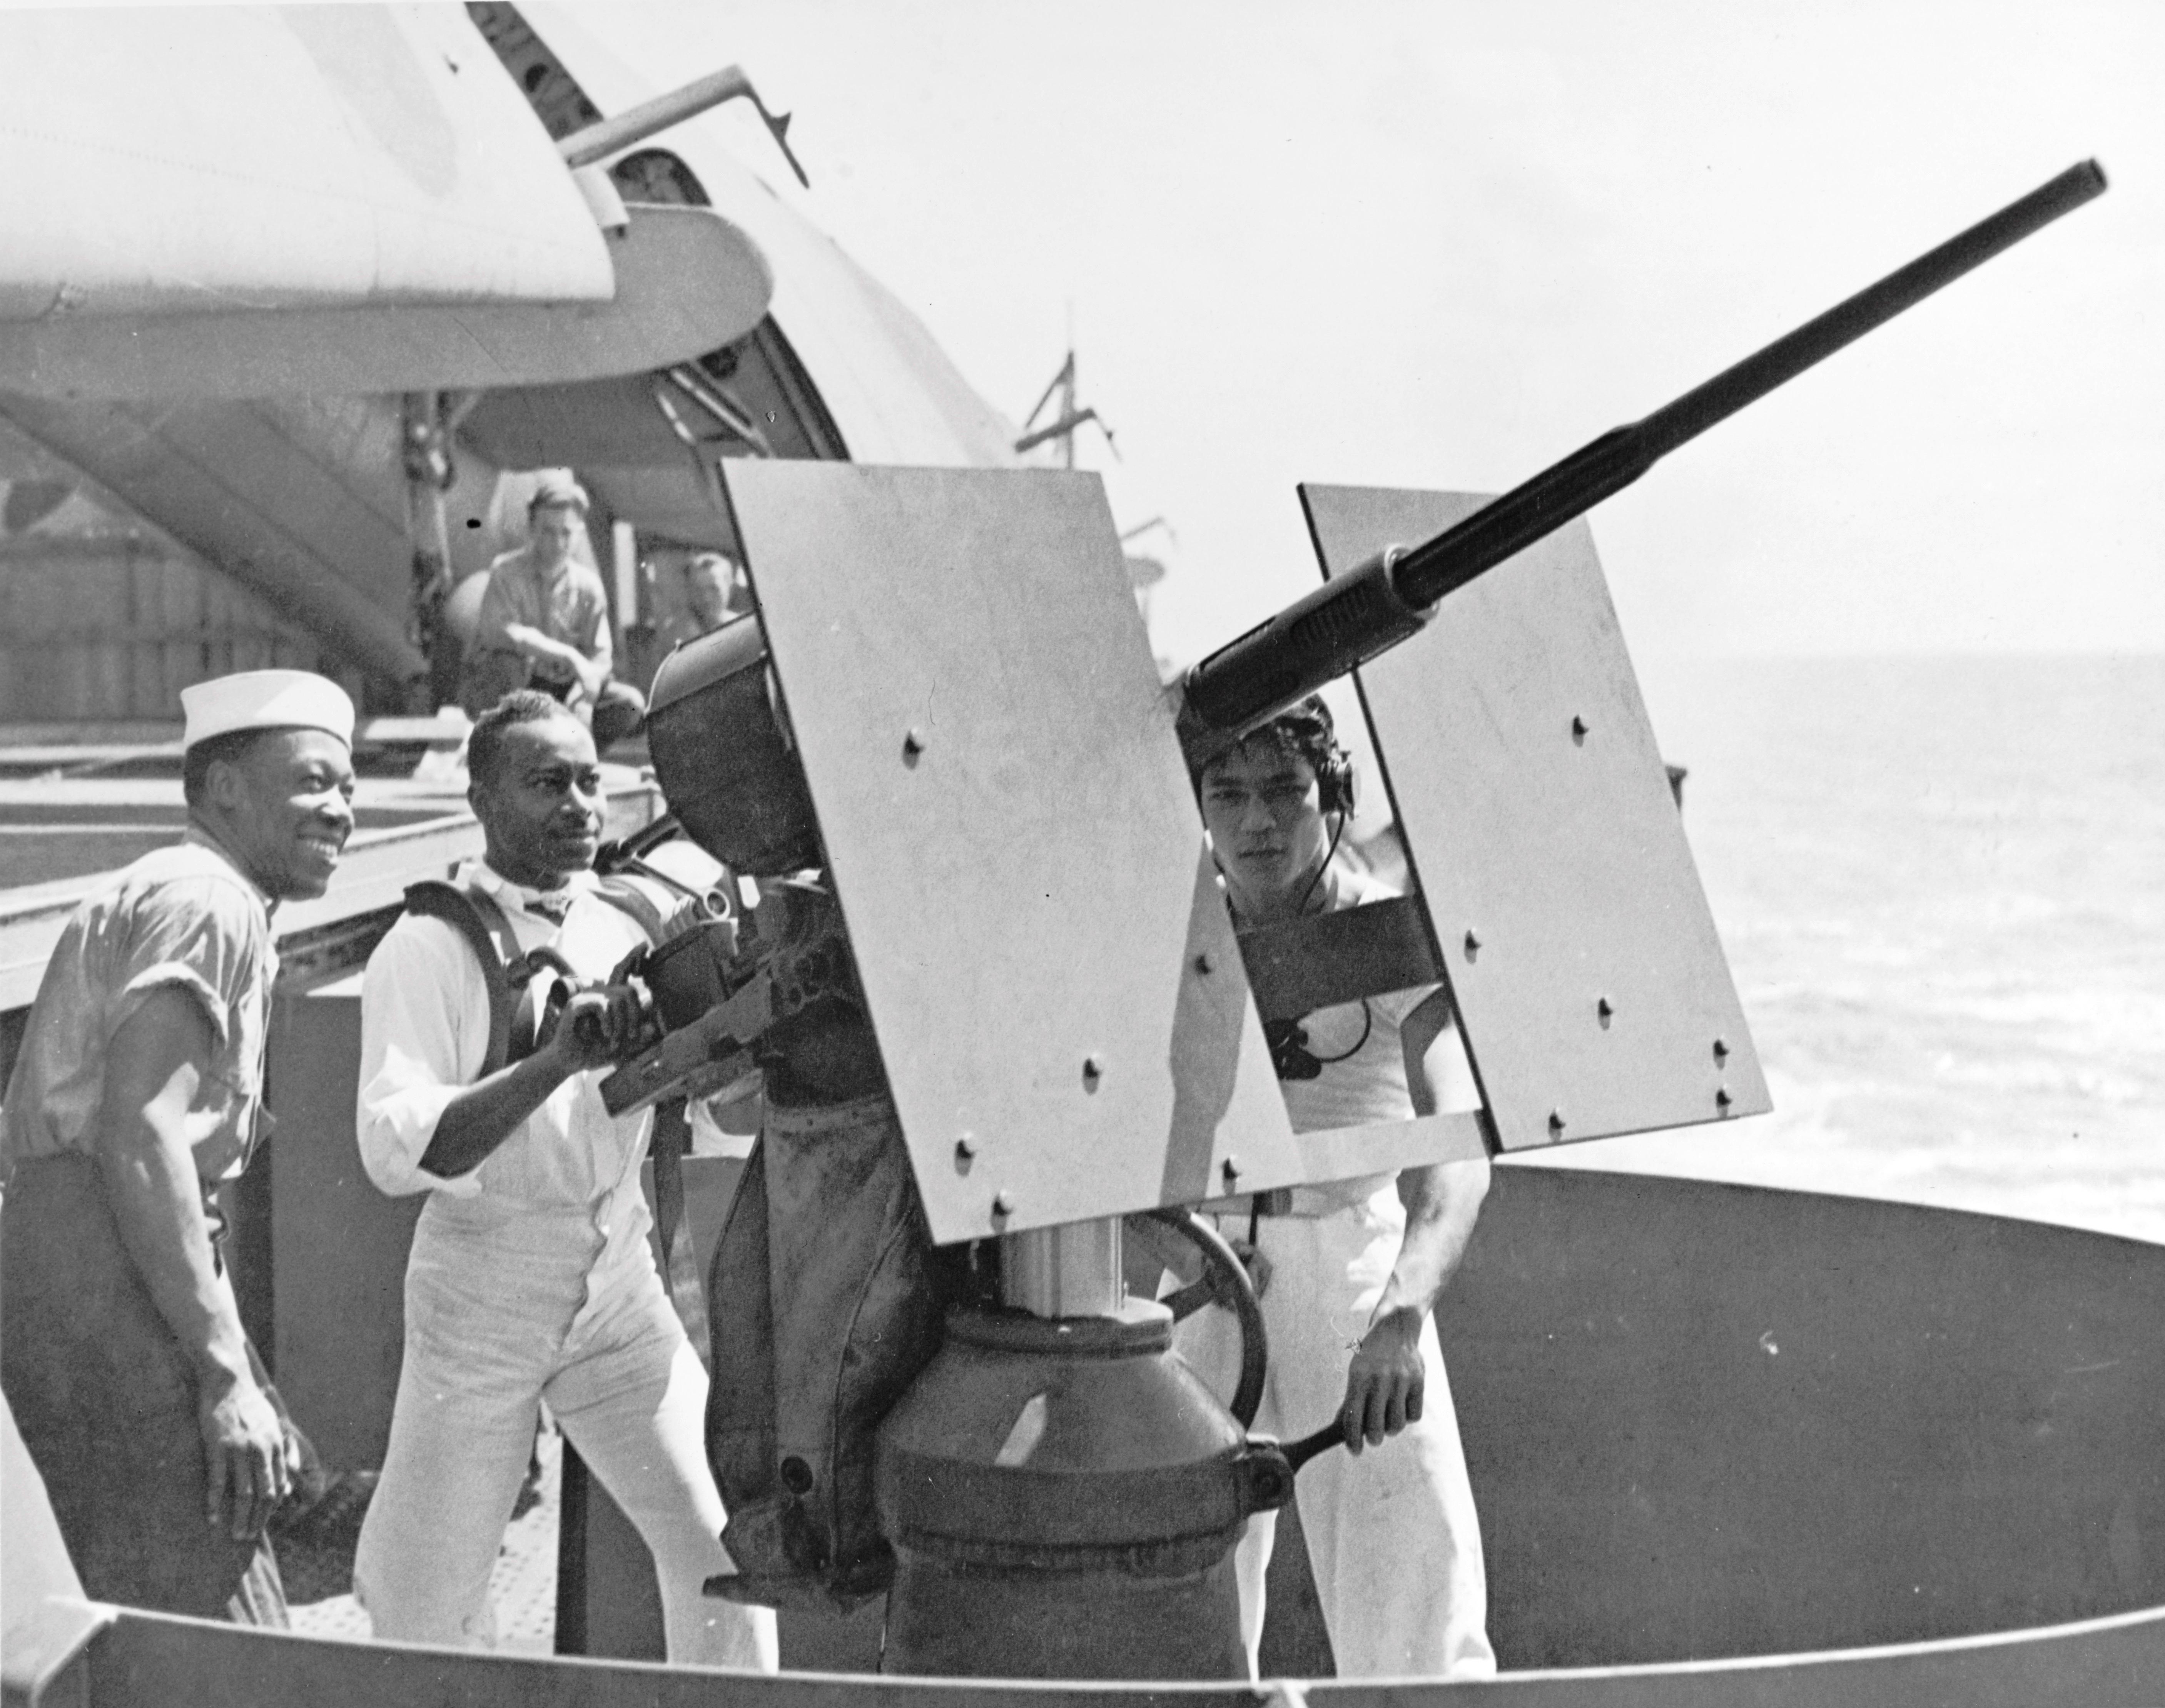 African-American mess attendants take their turn at a 20mm gun during gunnery training on Aircraft Transport USS Copahee during transit from California to Pearl Harbor, 9 Sep 1942. Note TBF Avengers on the flight deck.